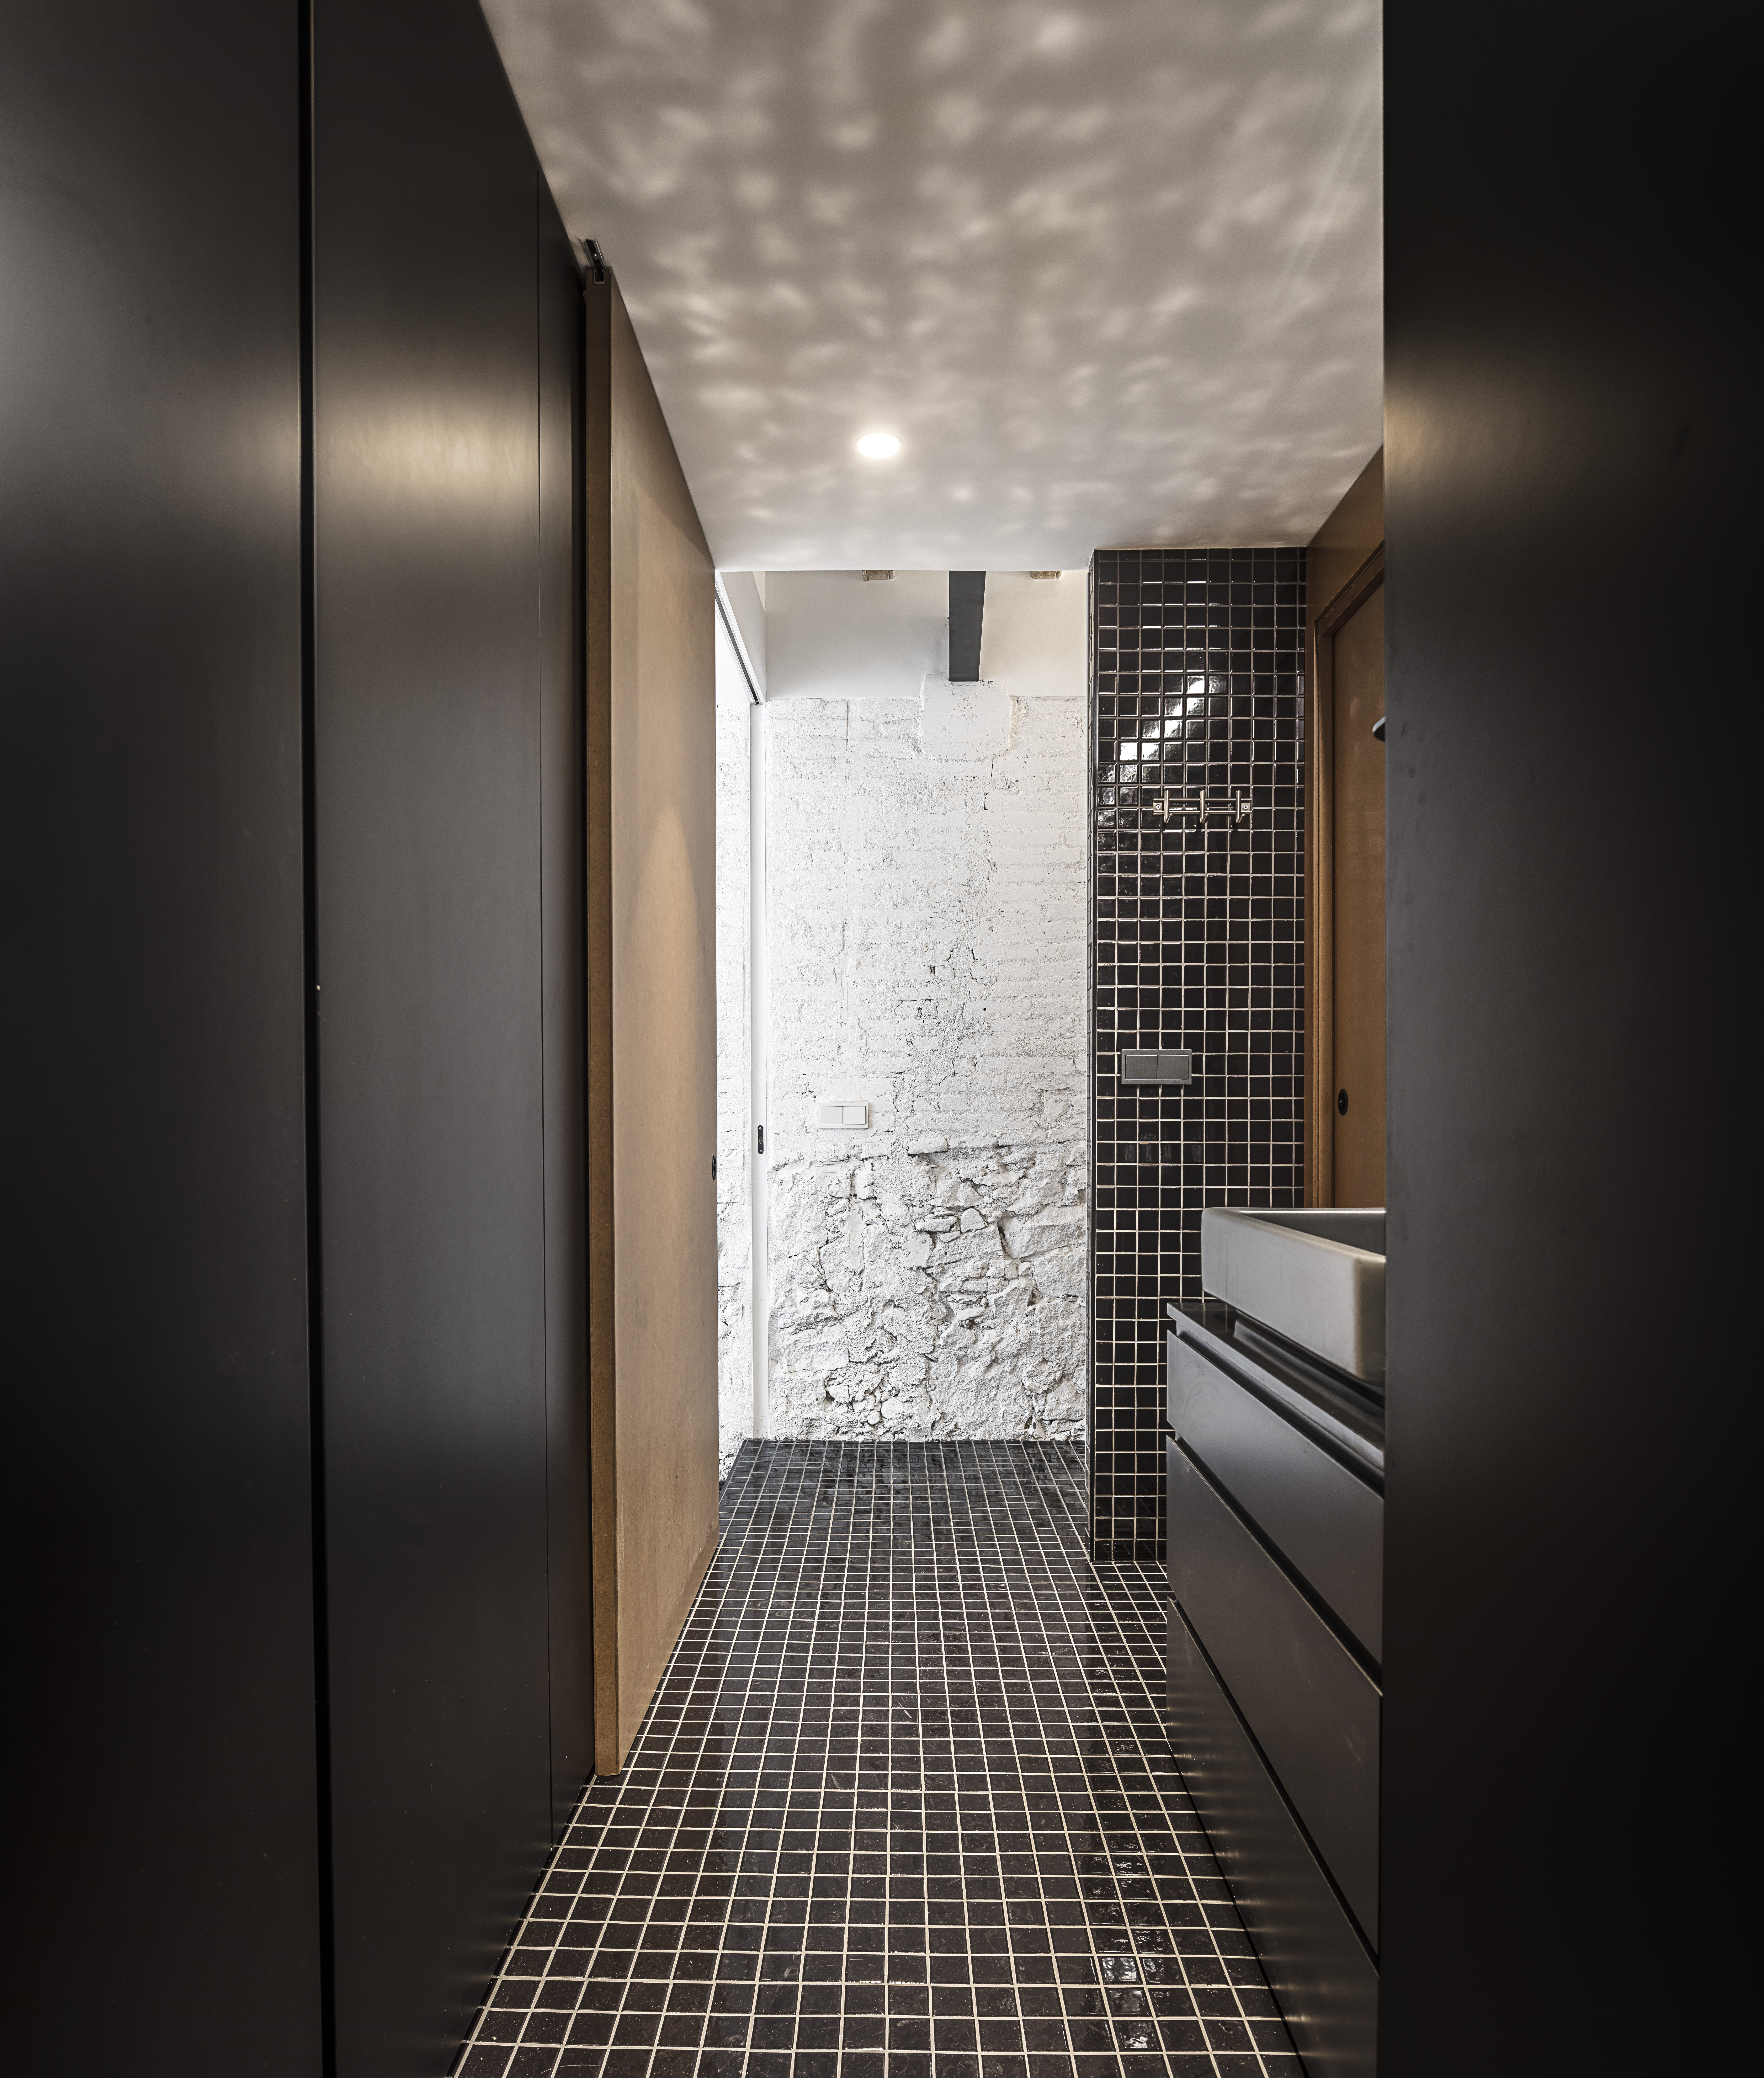 CRU innovative flat renovation project in Barcelona. La Petra, an old apartment renovated with a strong Barcelona character